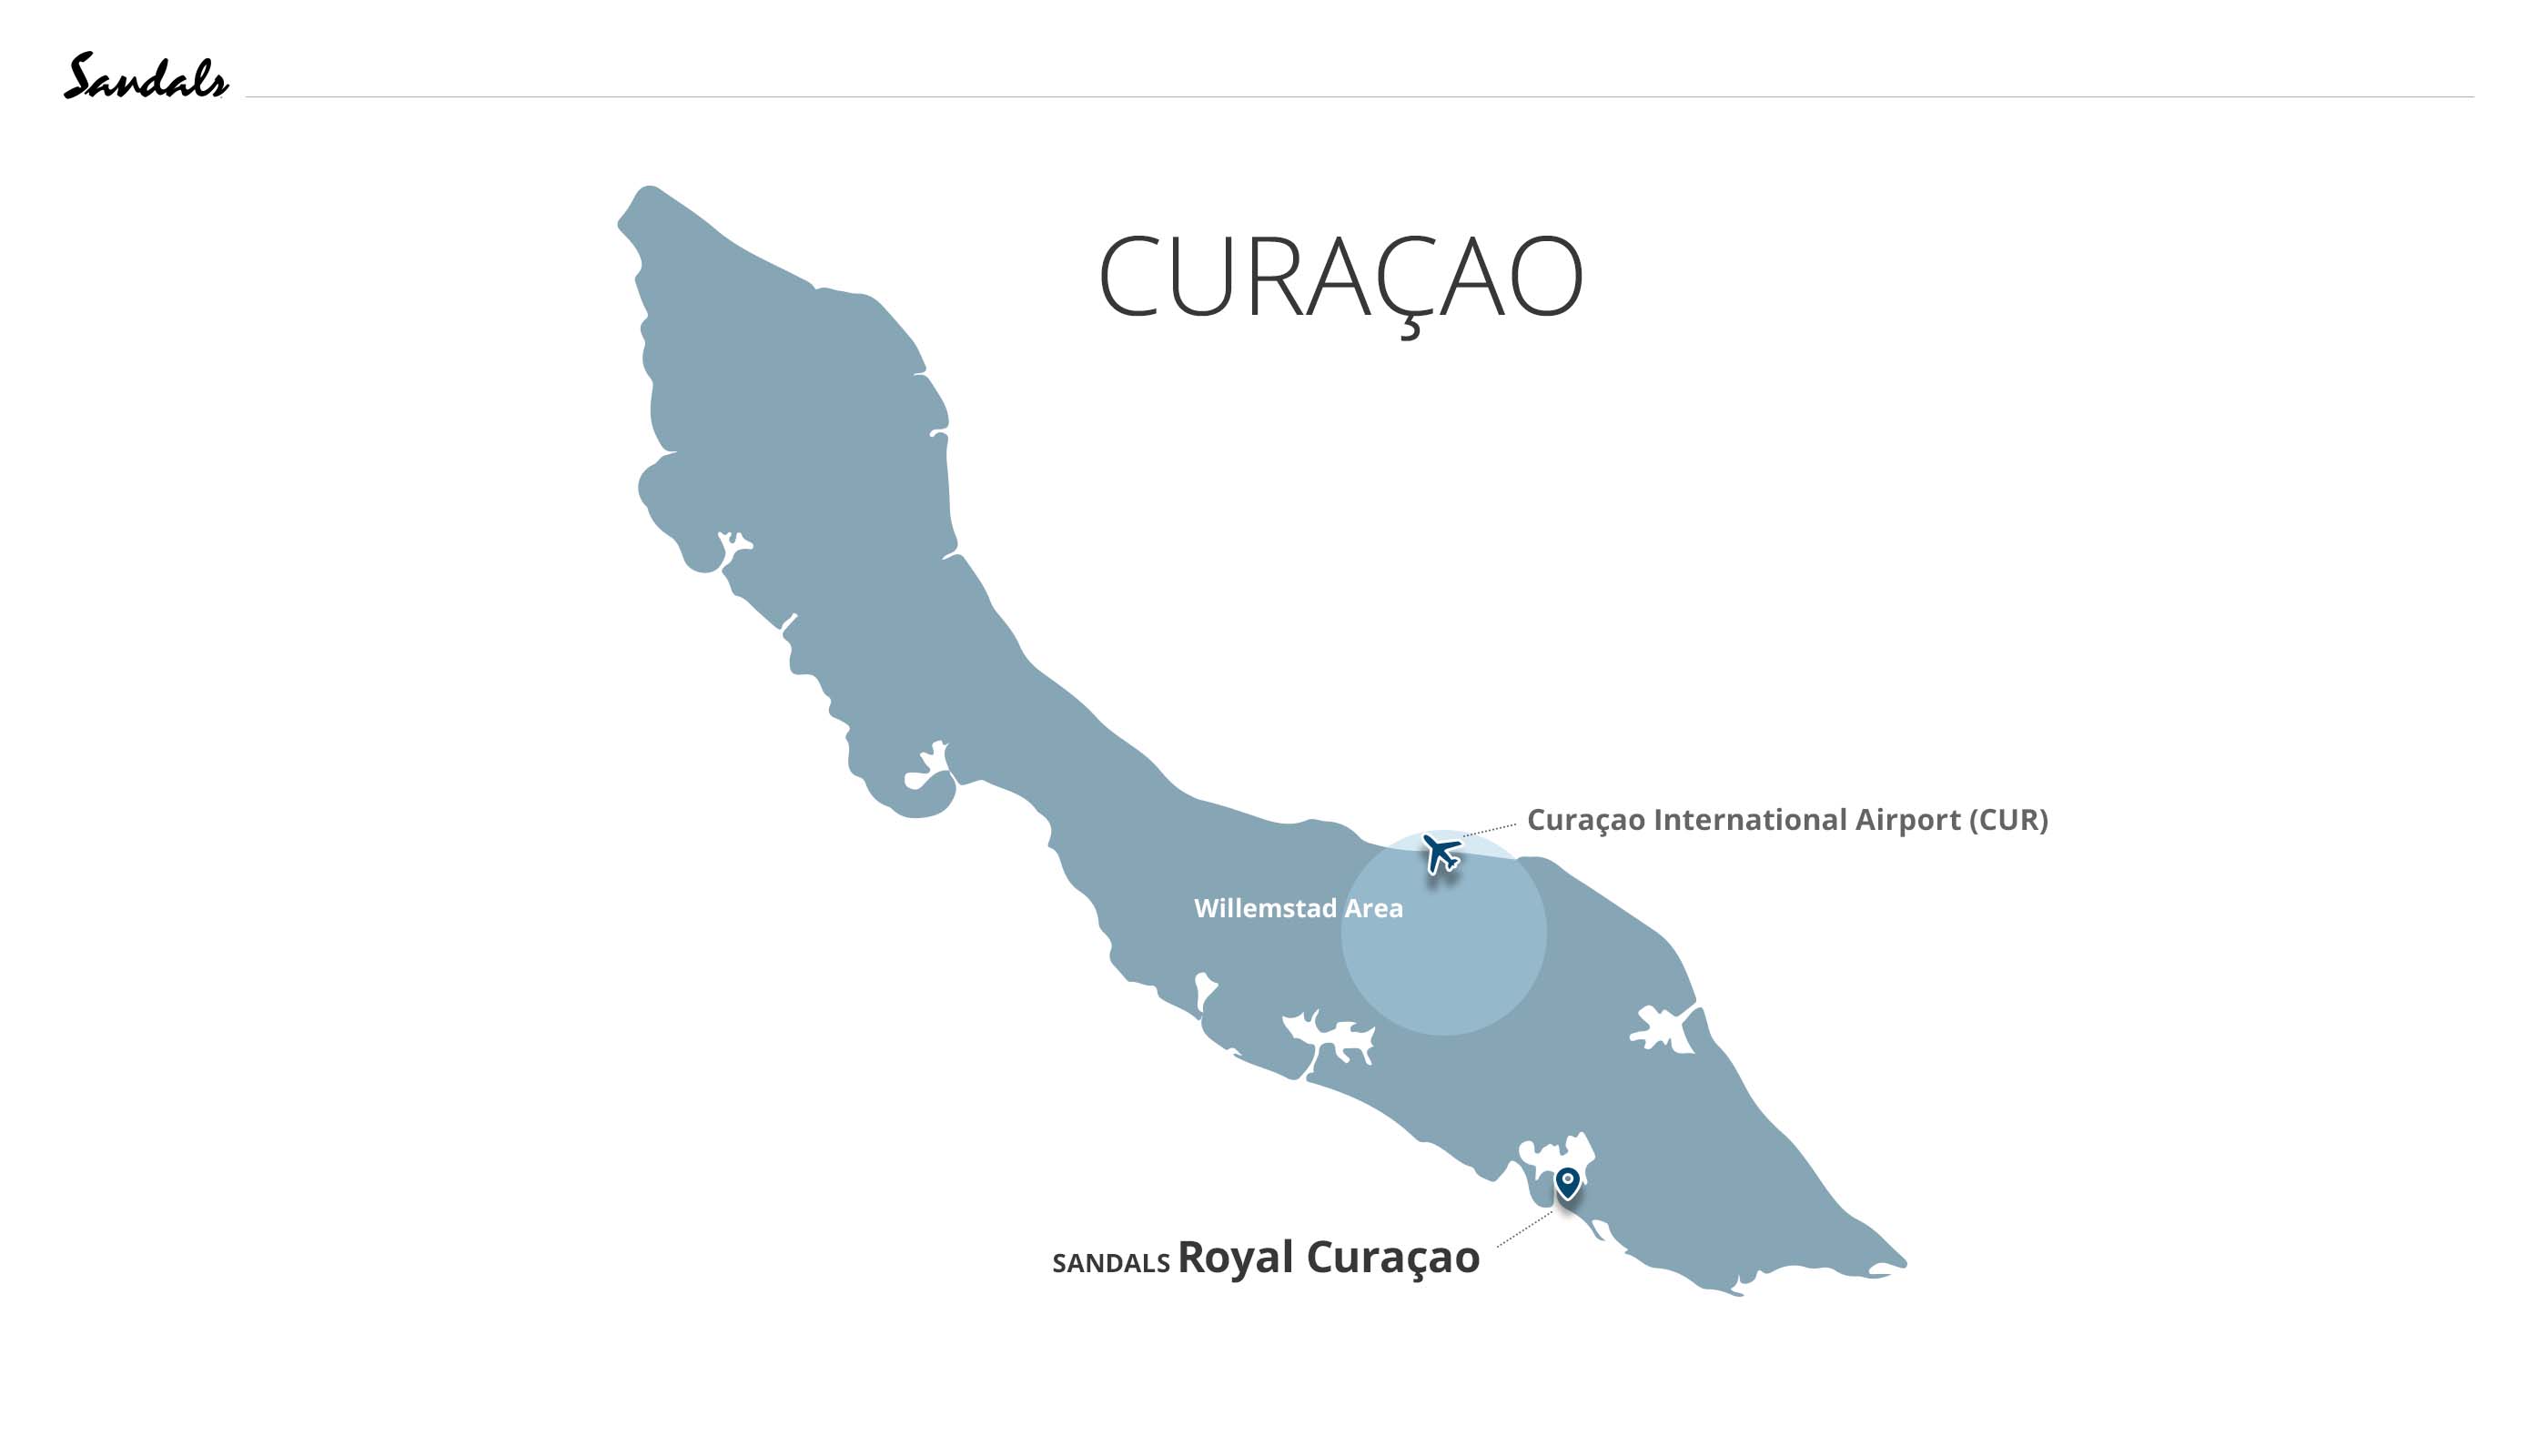 Curacao sandals resorts Map